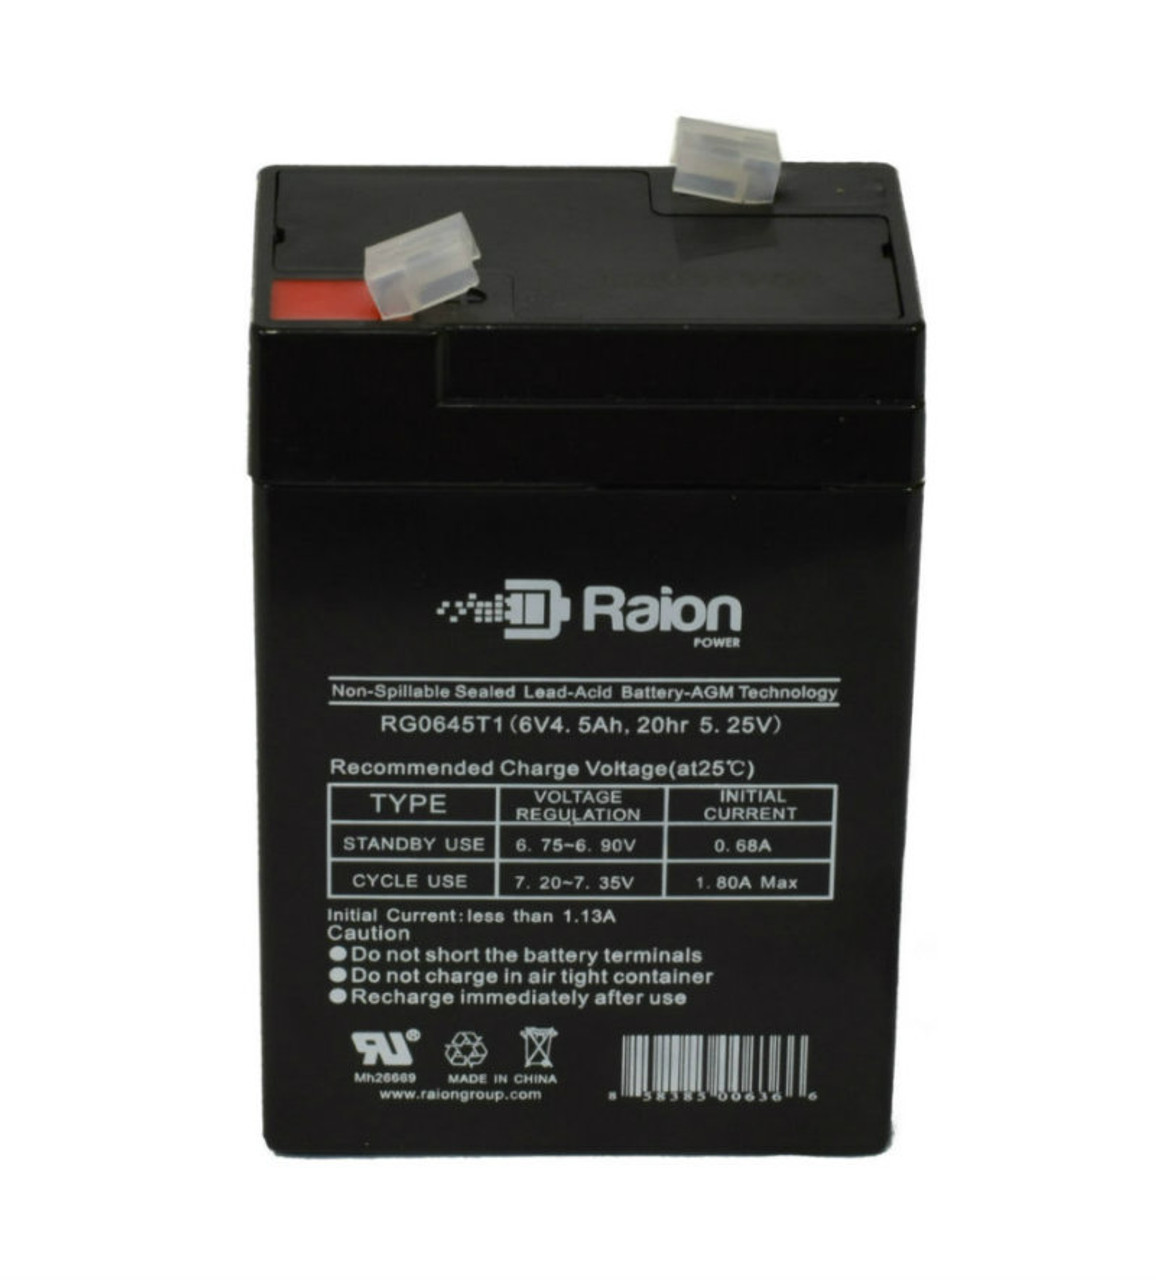 Raion Power RG0645T1 Replacement Battery Cartridge for Criticare Systems 50445 Pulse Oximeter